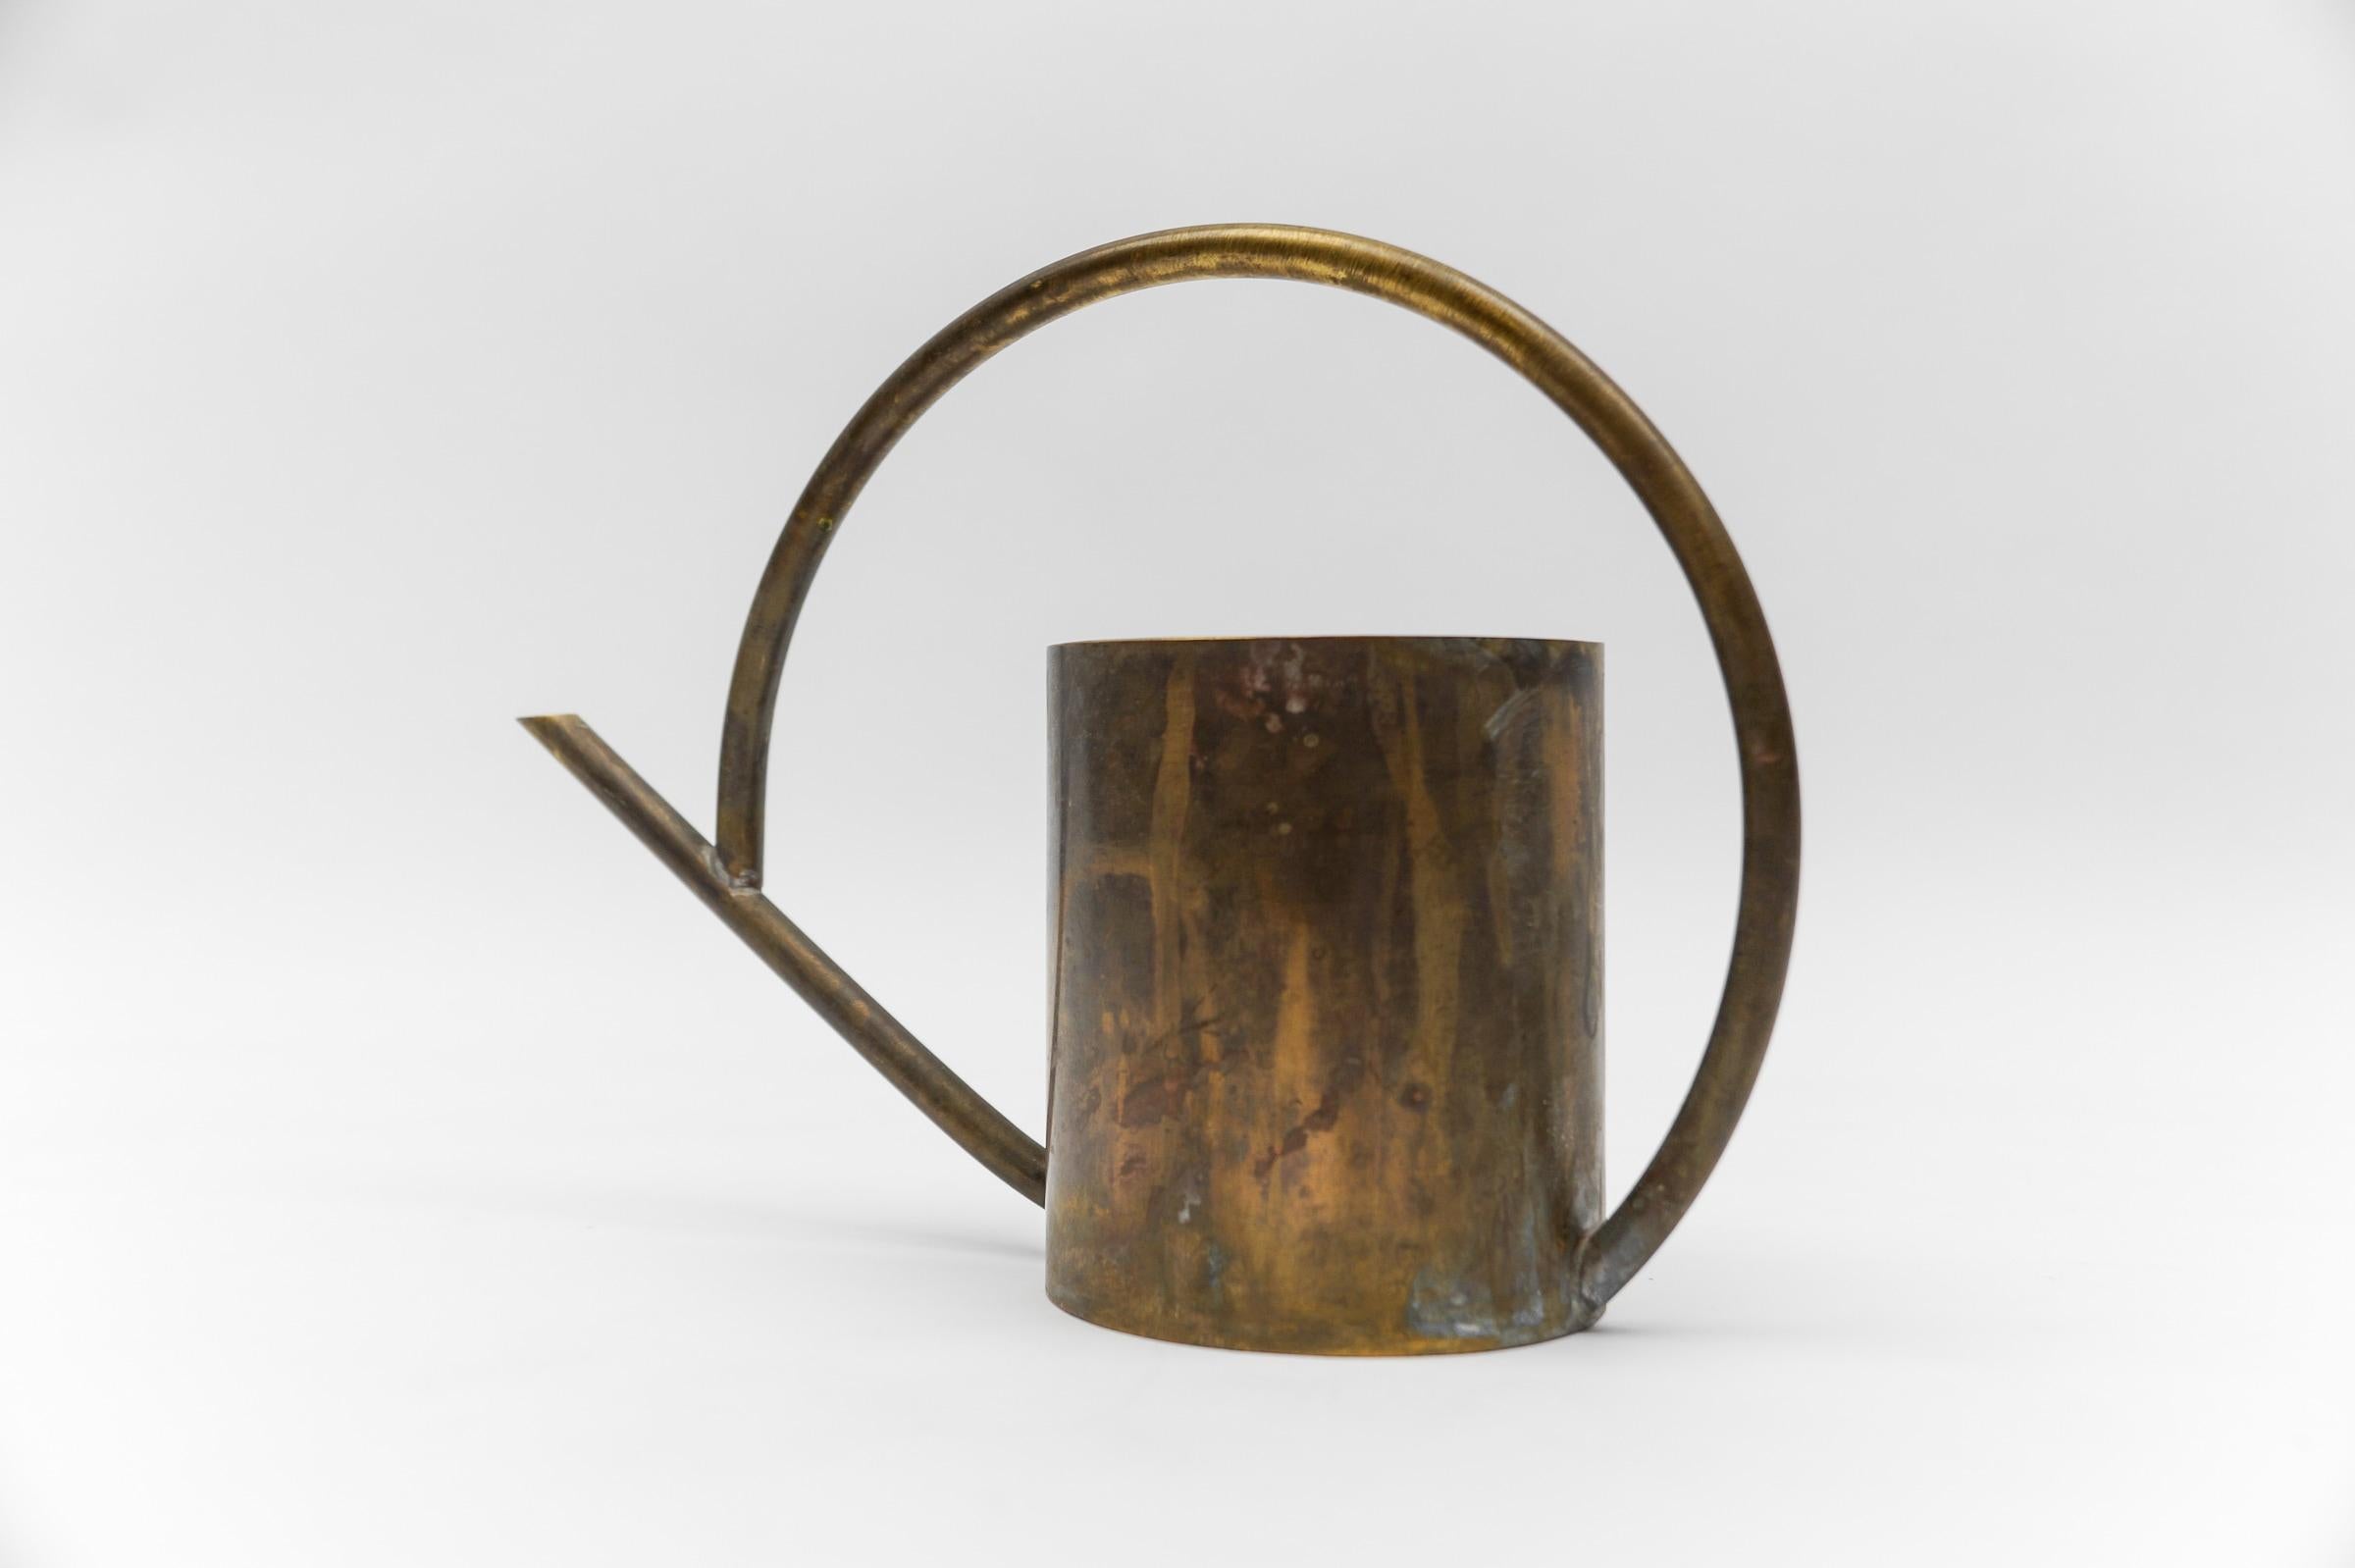 Mid-20th Century Art Deco Bauhaus  Watering Can in Massive Brass, 1930s / 1940s Germany For Sale